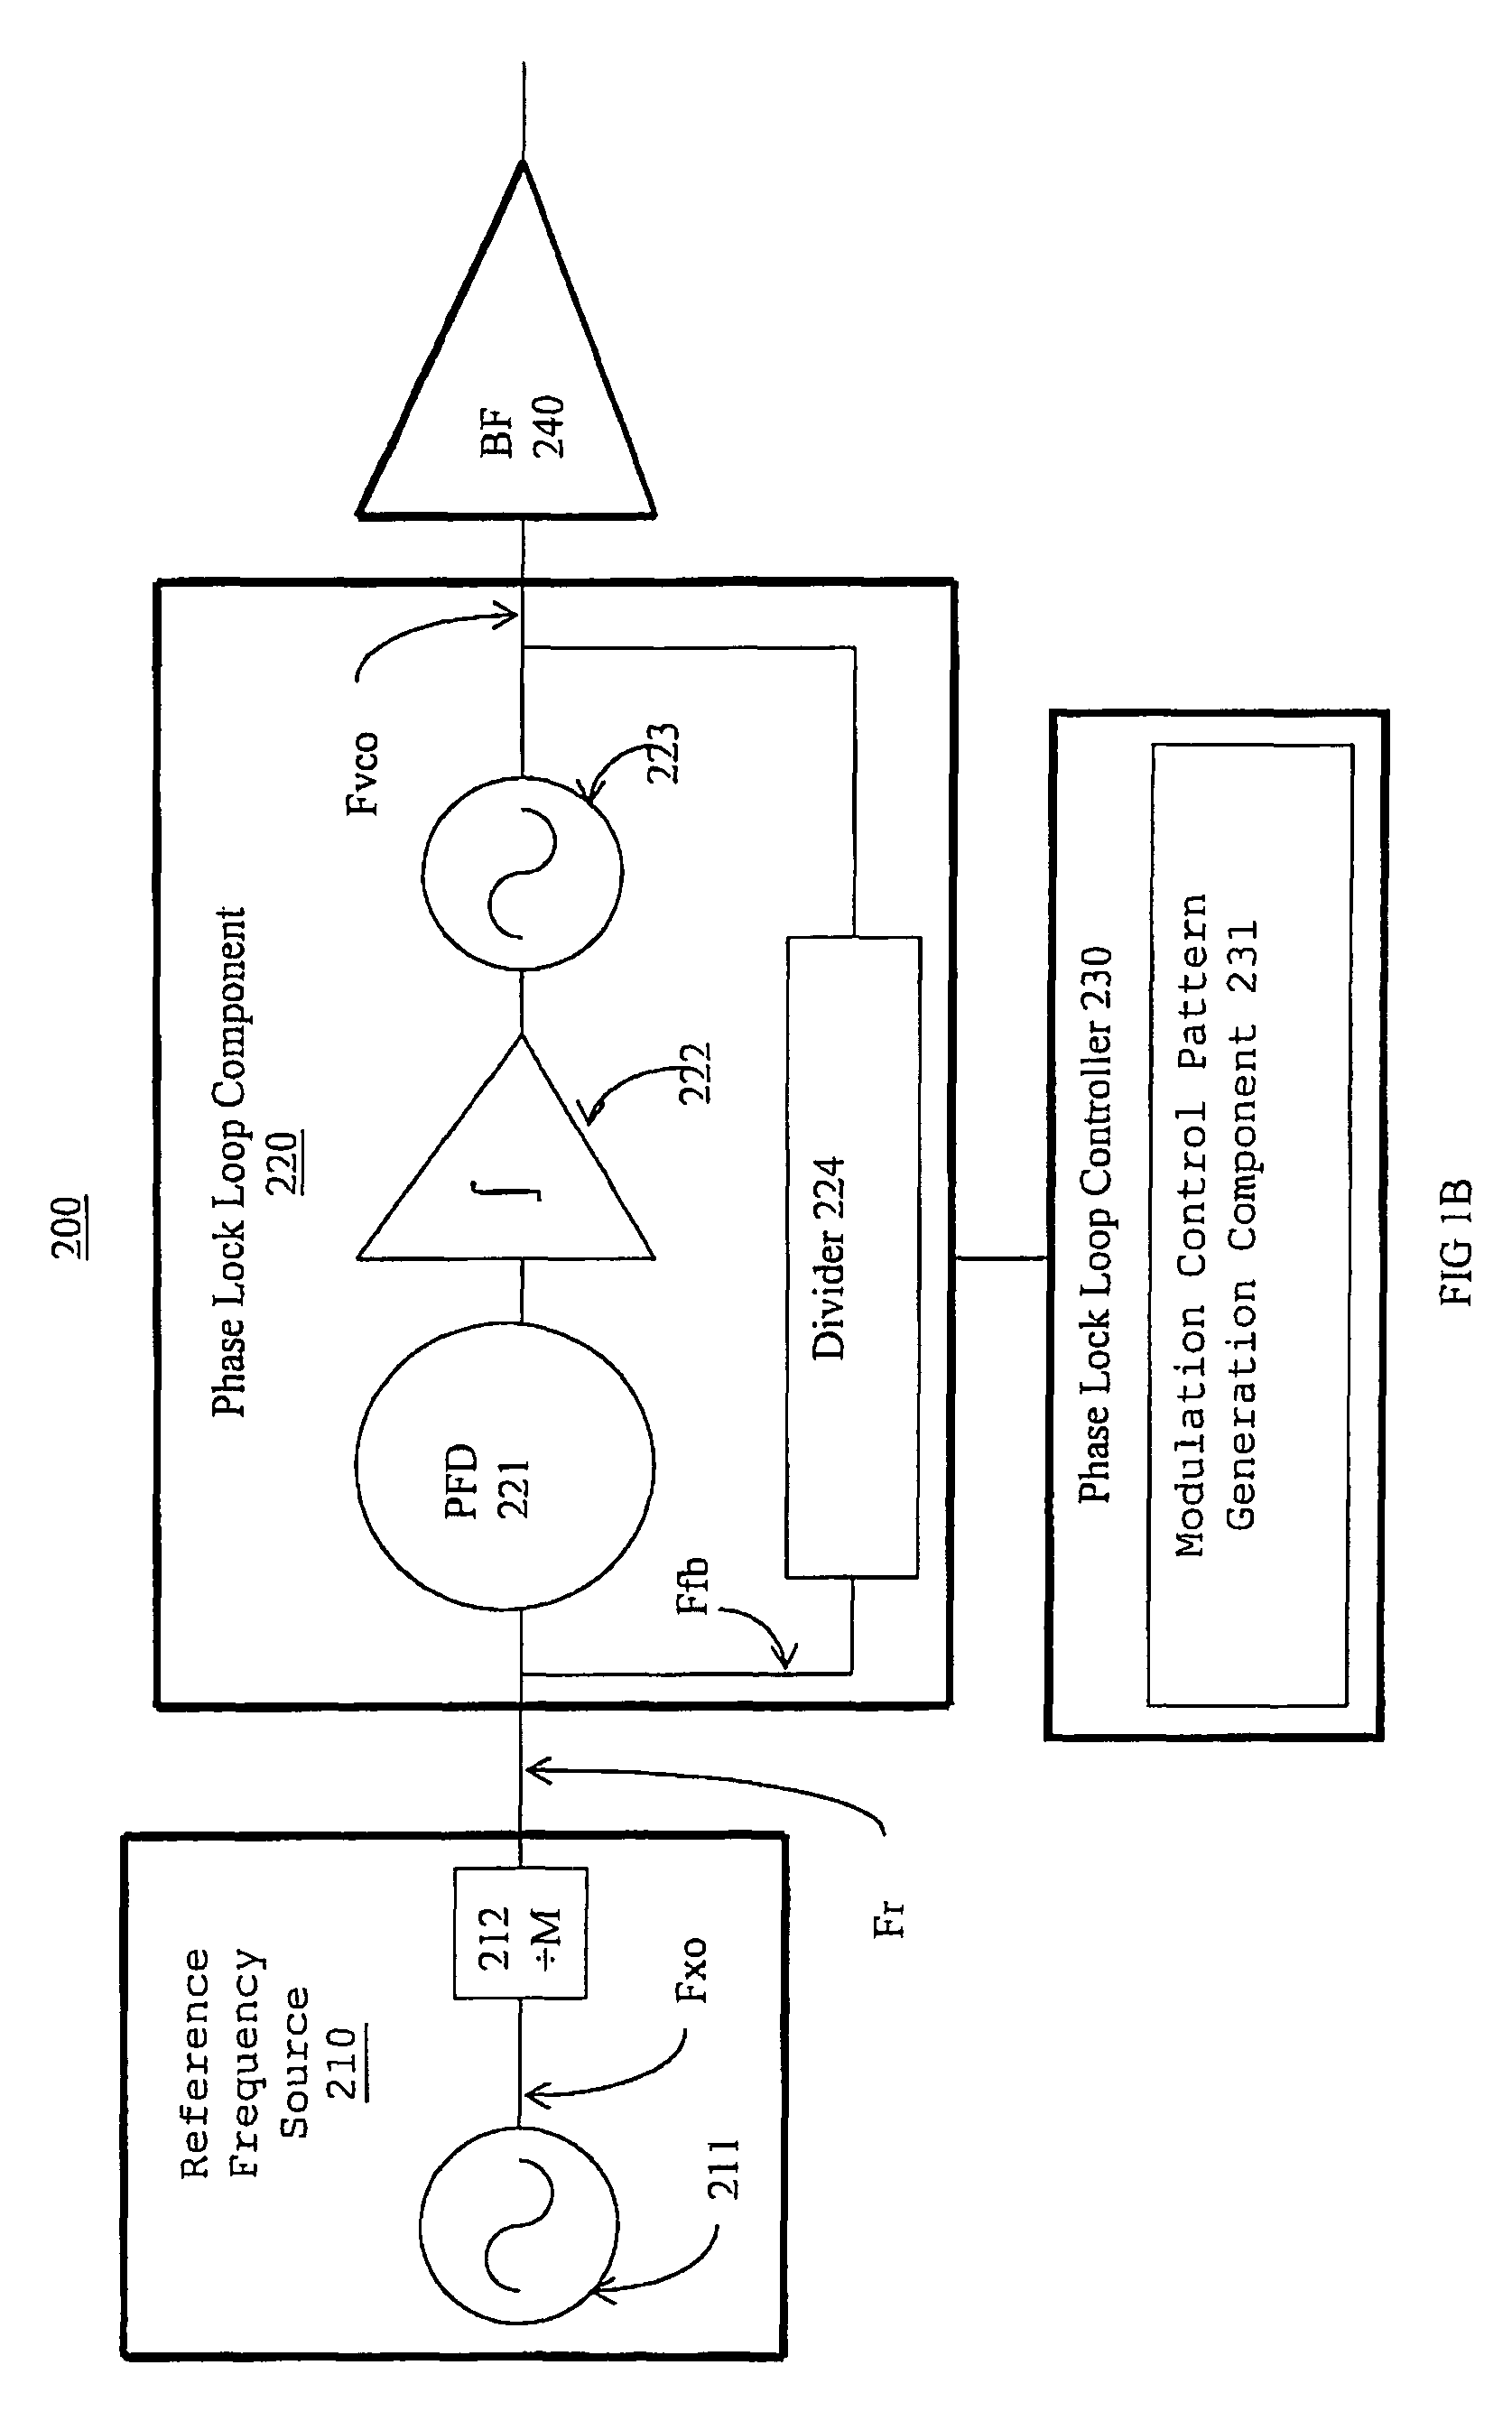 Spread spectrum frequency synthesizer with high order accumulation for frequency profile generation